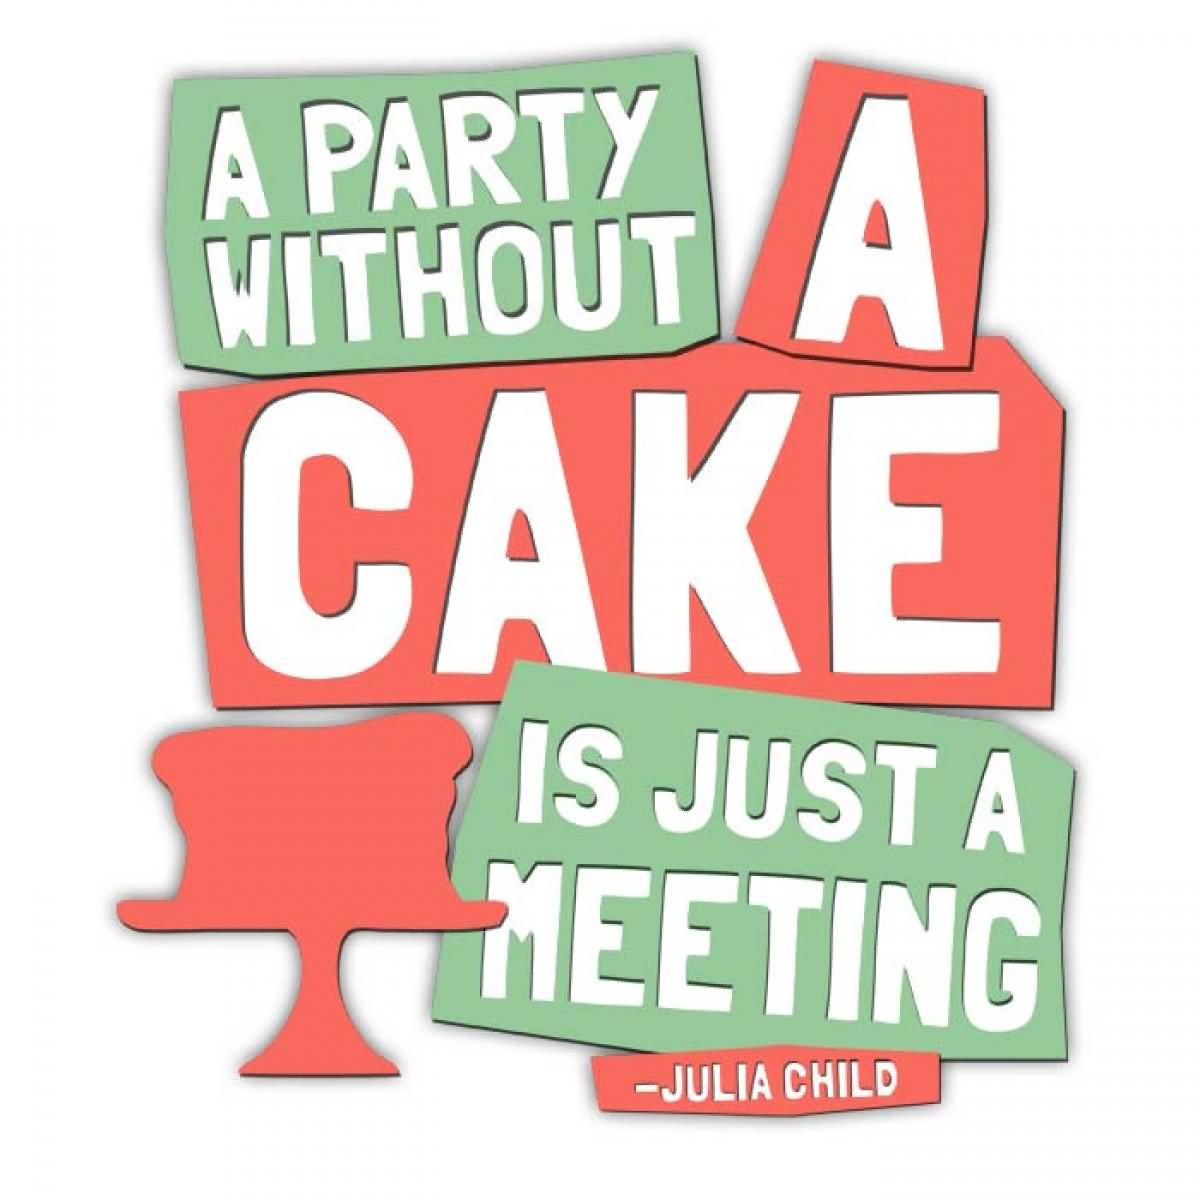 A party without cake is just a meeting.